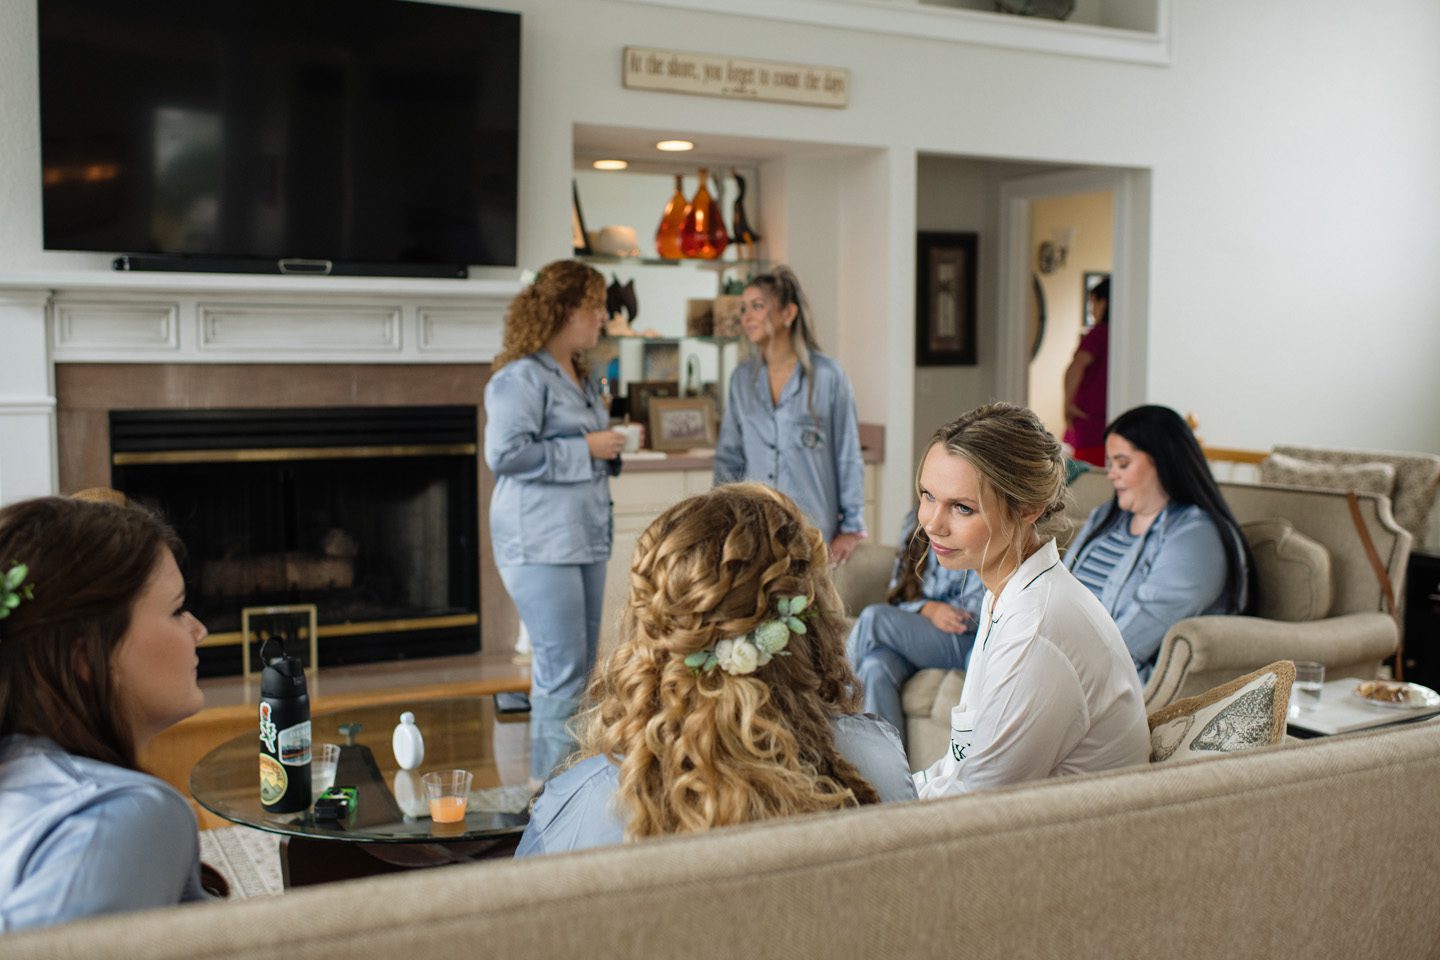 Bride and bridesmaids in matching pajamas getting ready for the wedding